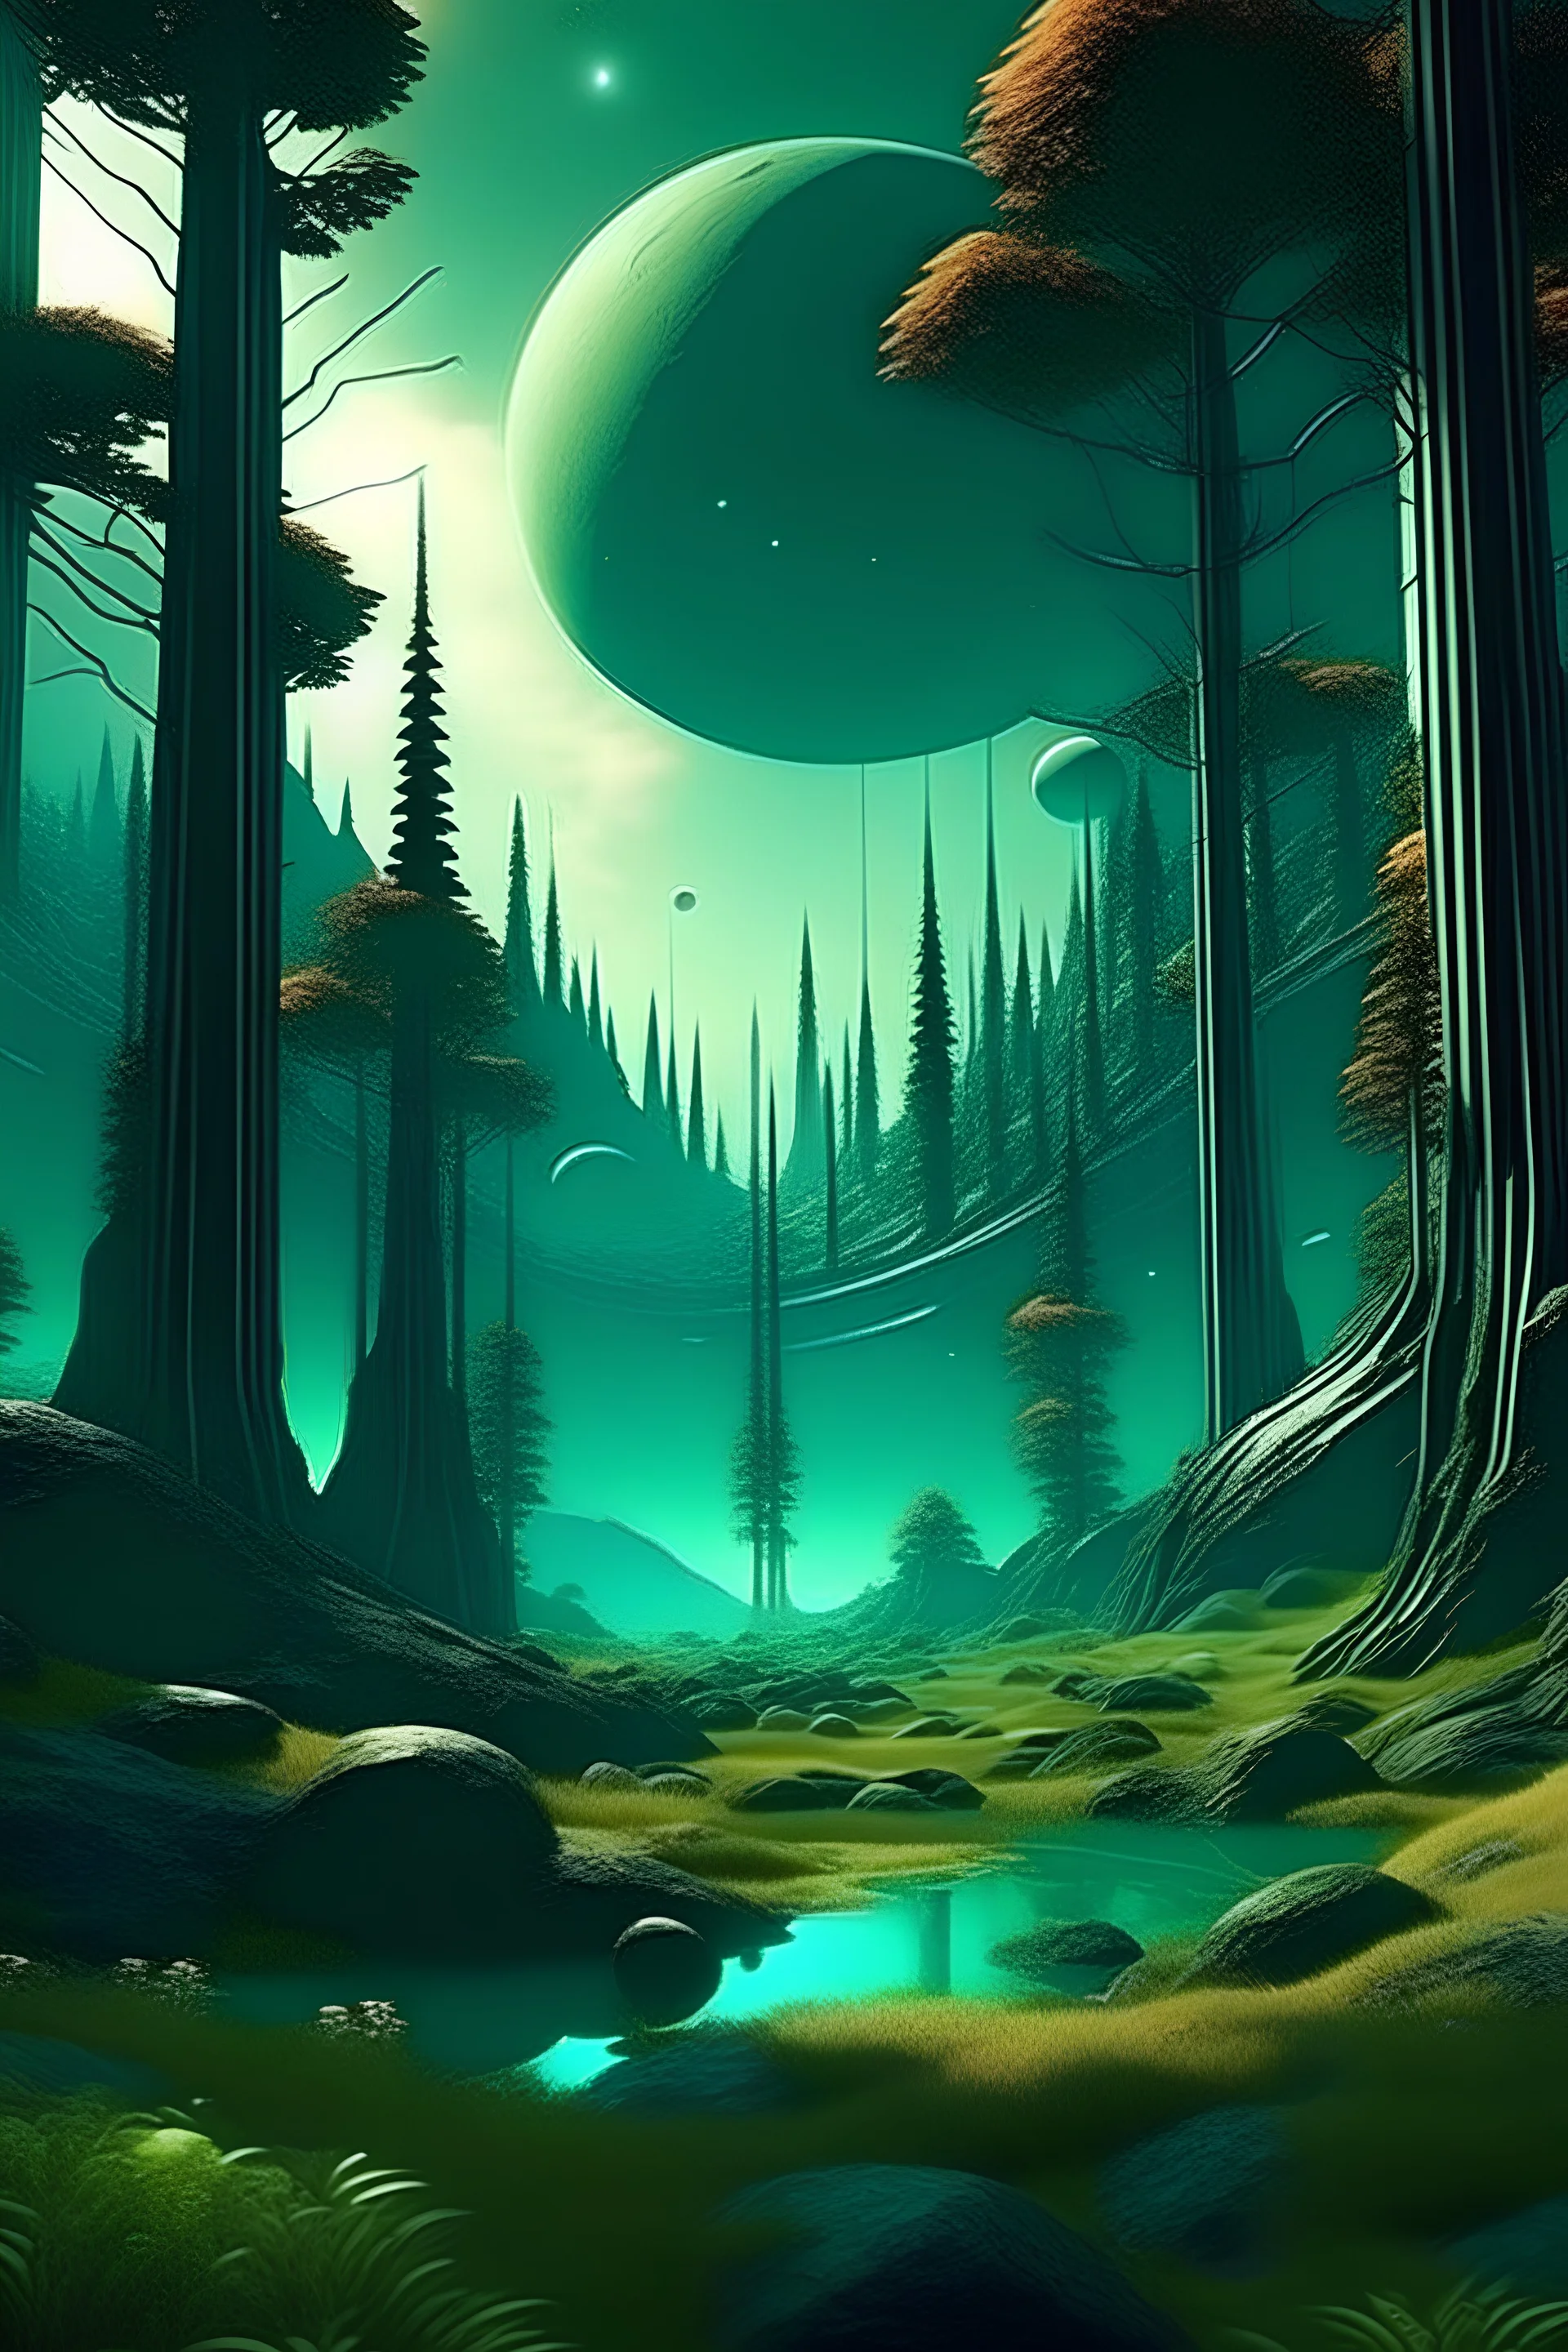 Beautiful forest landscape in another planet